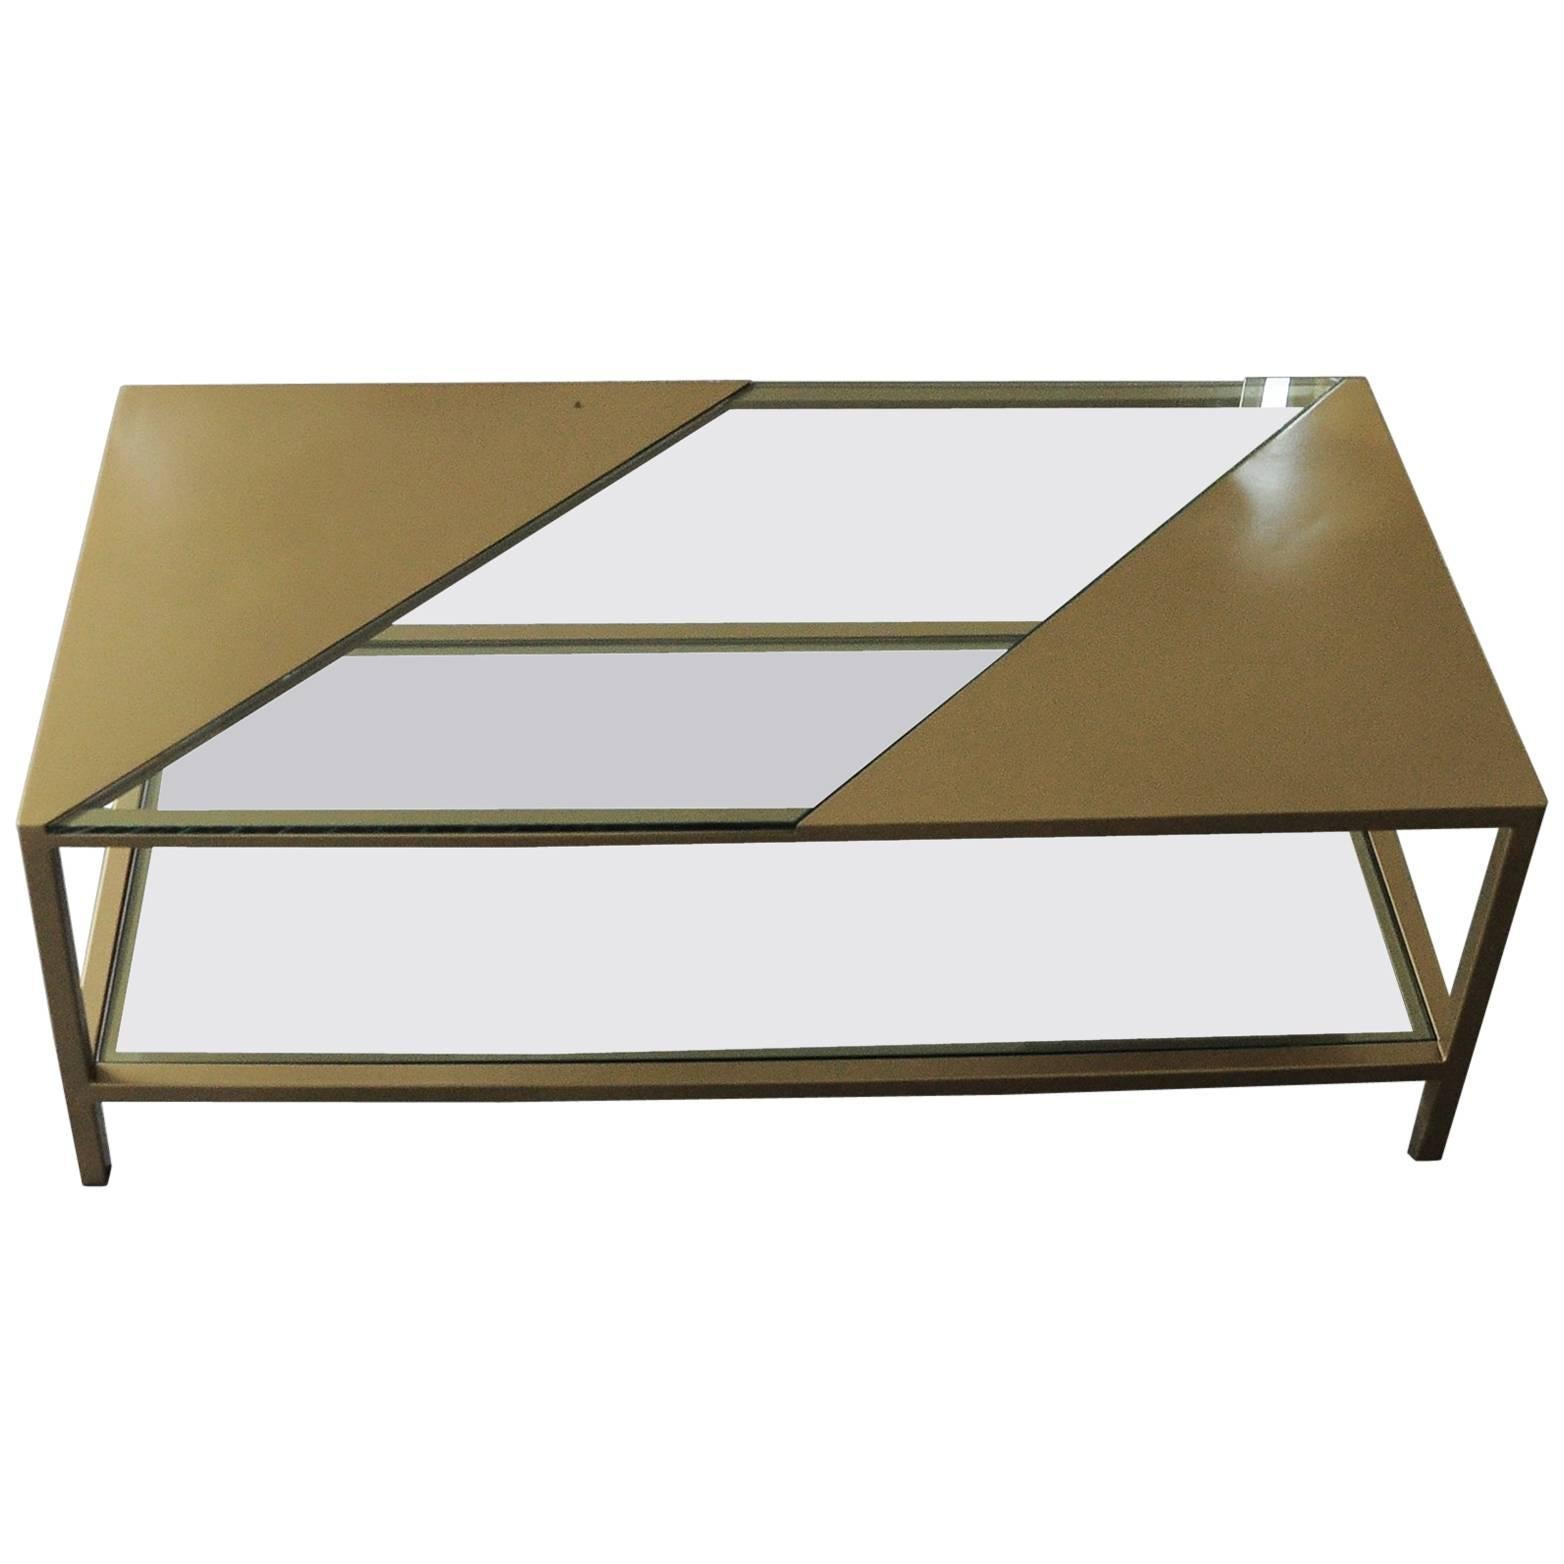 Parallel Metal Coffee Table For Sale